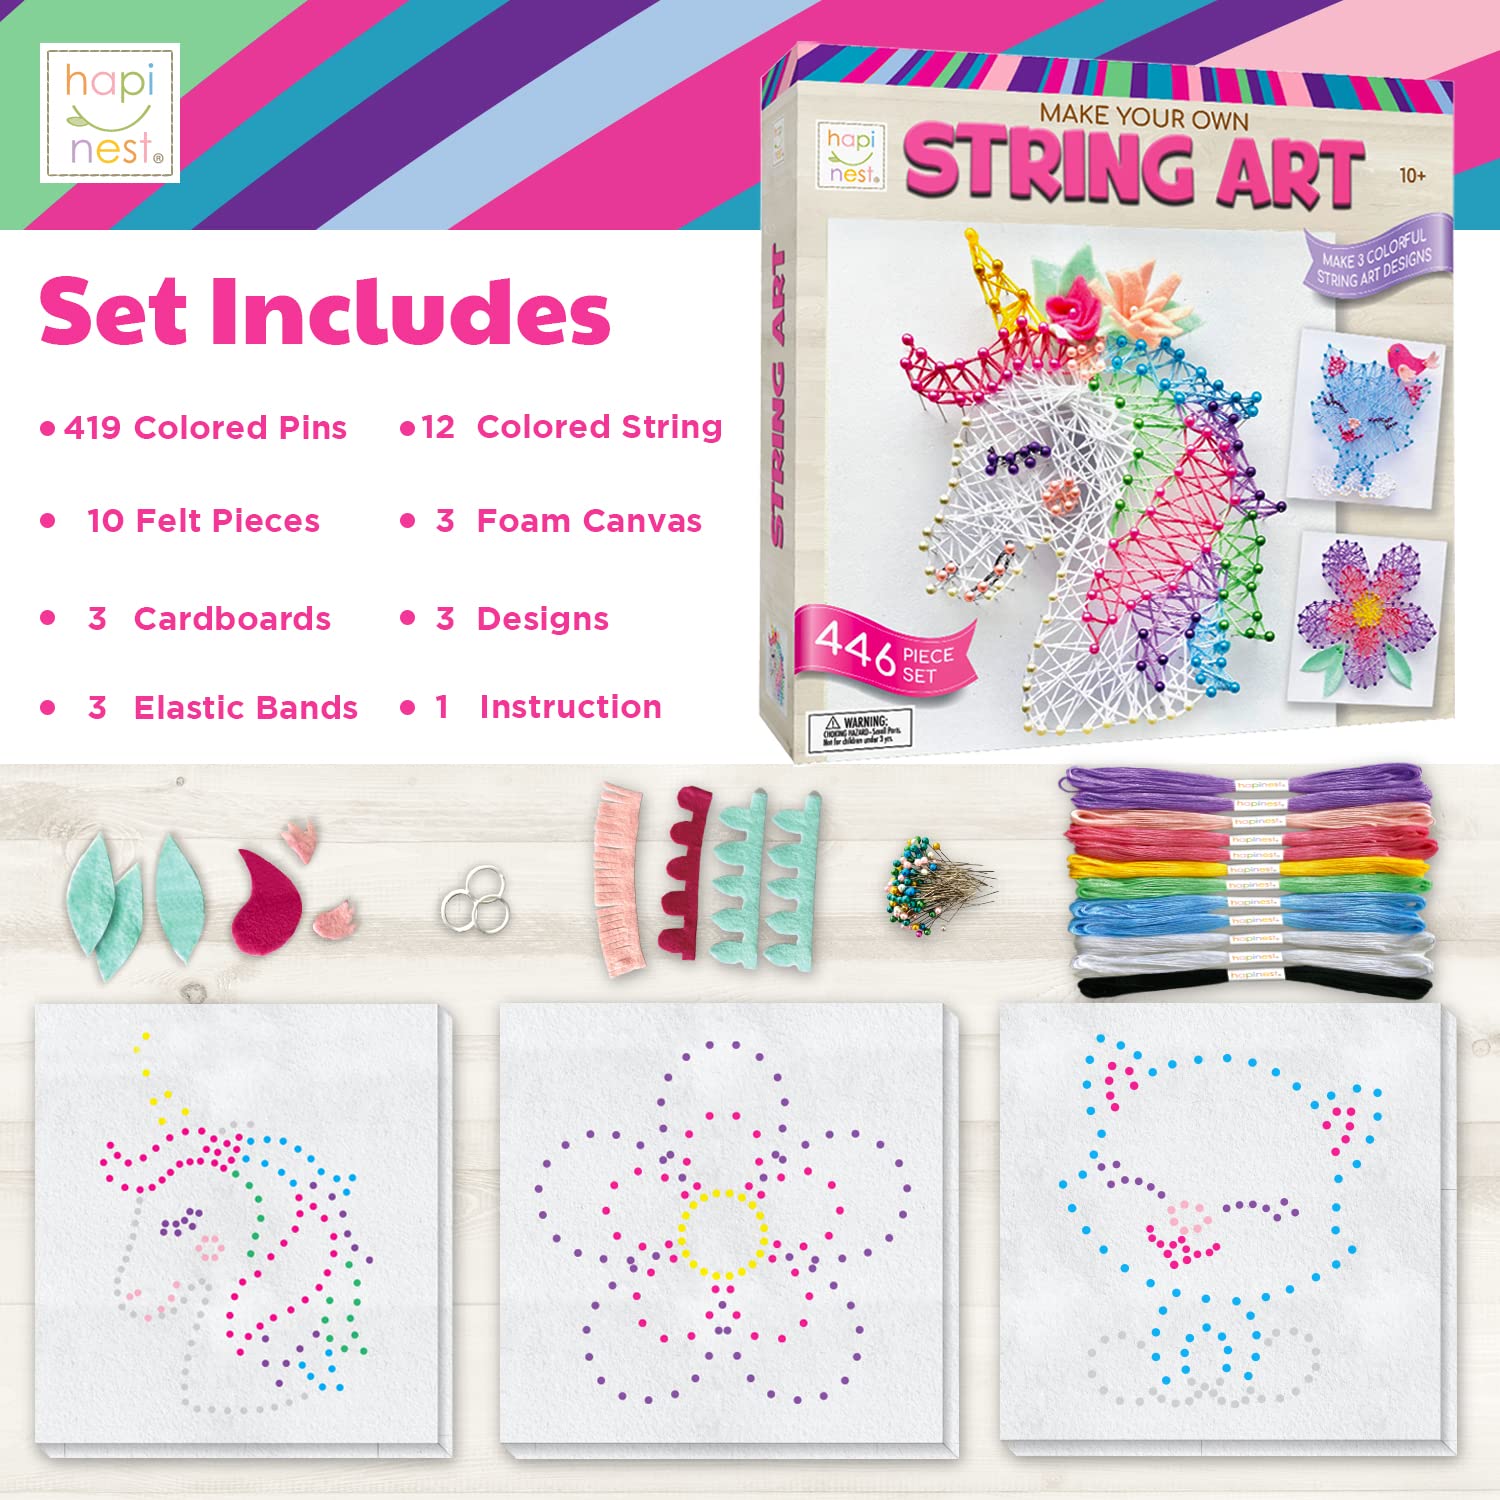 Hapinest String Art Craft Kit Gifts for Tween Girls Ages 10 11 12 Years Old and Up | Makes 3 Designs - Unicorn, Cat, and Flower